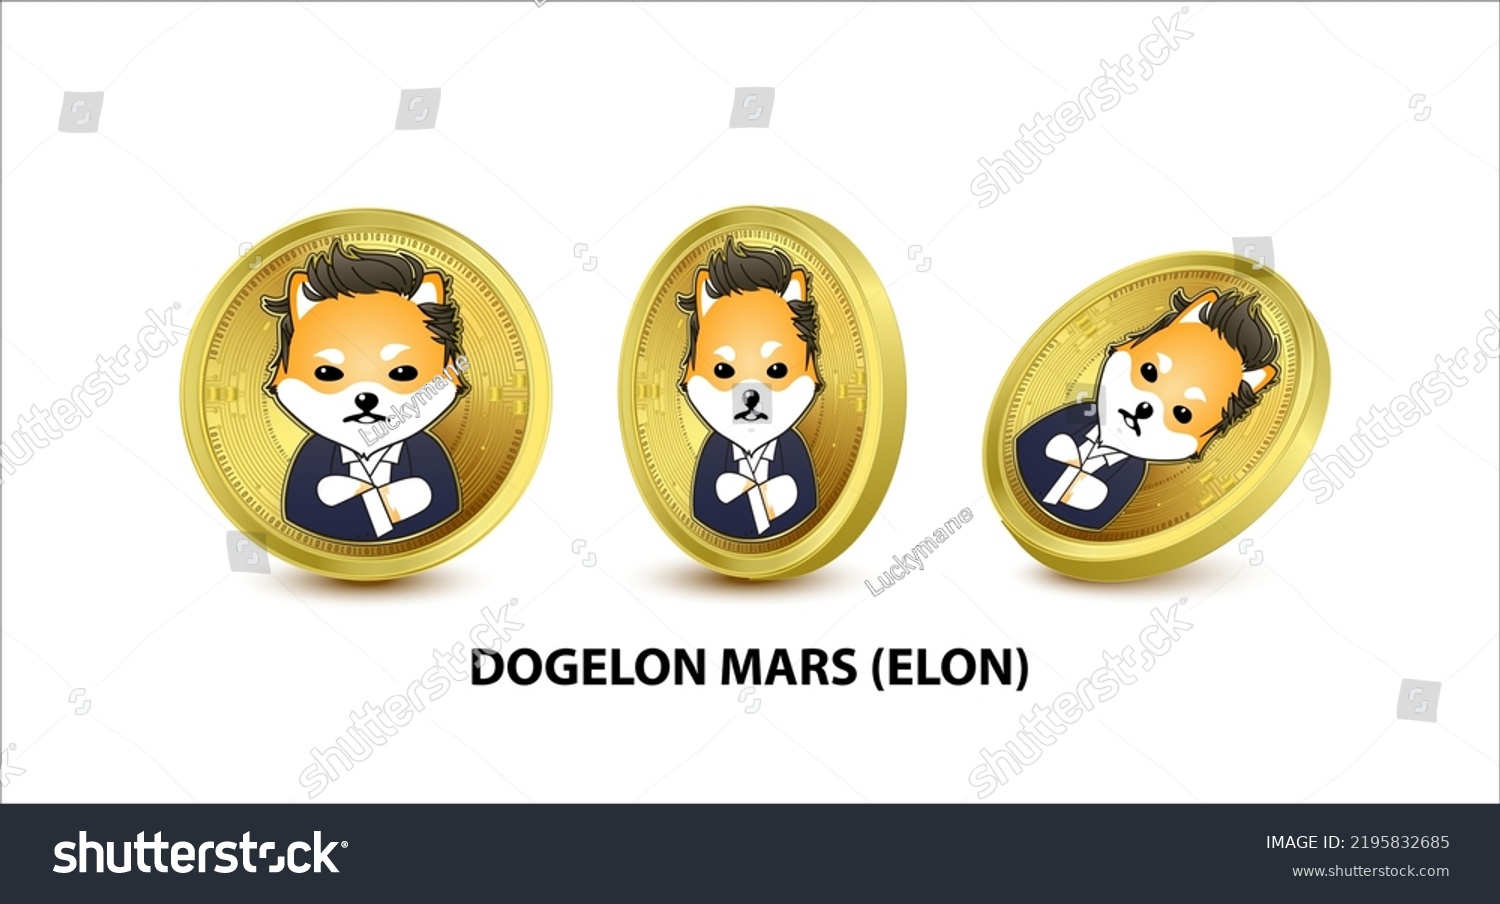 SVG of Set of Gold coin Dogelon Mars (ELON) Vector illustration. Digital currency. Cryptocurrency Golden coins with bitcoin, ripple ethereum symbol isolated on white background. 3D isometric Physical coins. svg